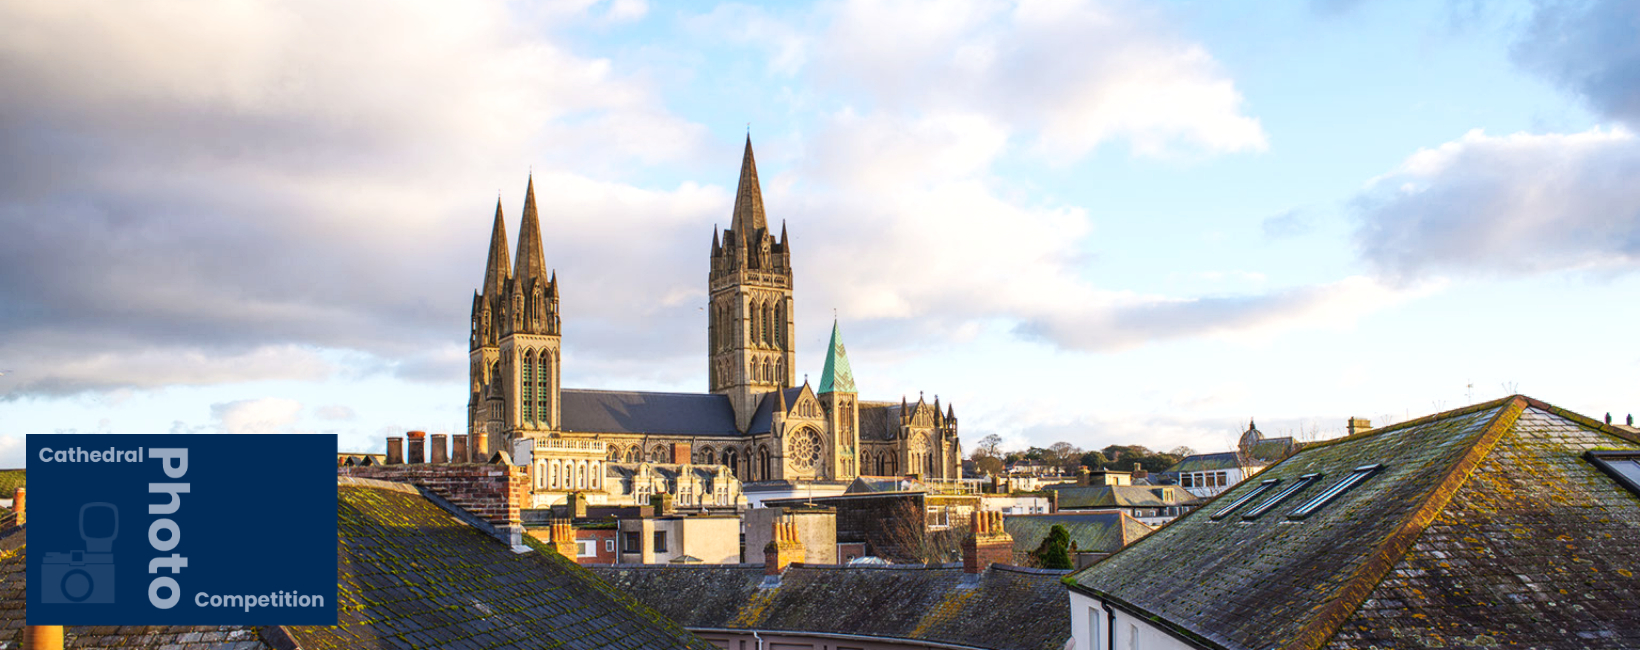 Truro Cathedral Photo competition - A picture of Truro Cathedral taken in the early morning